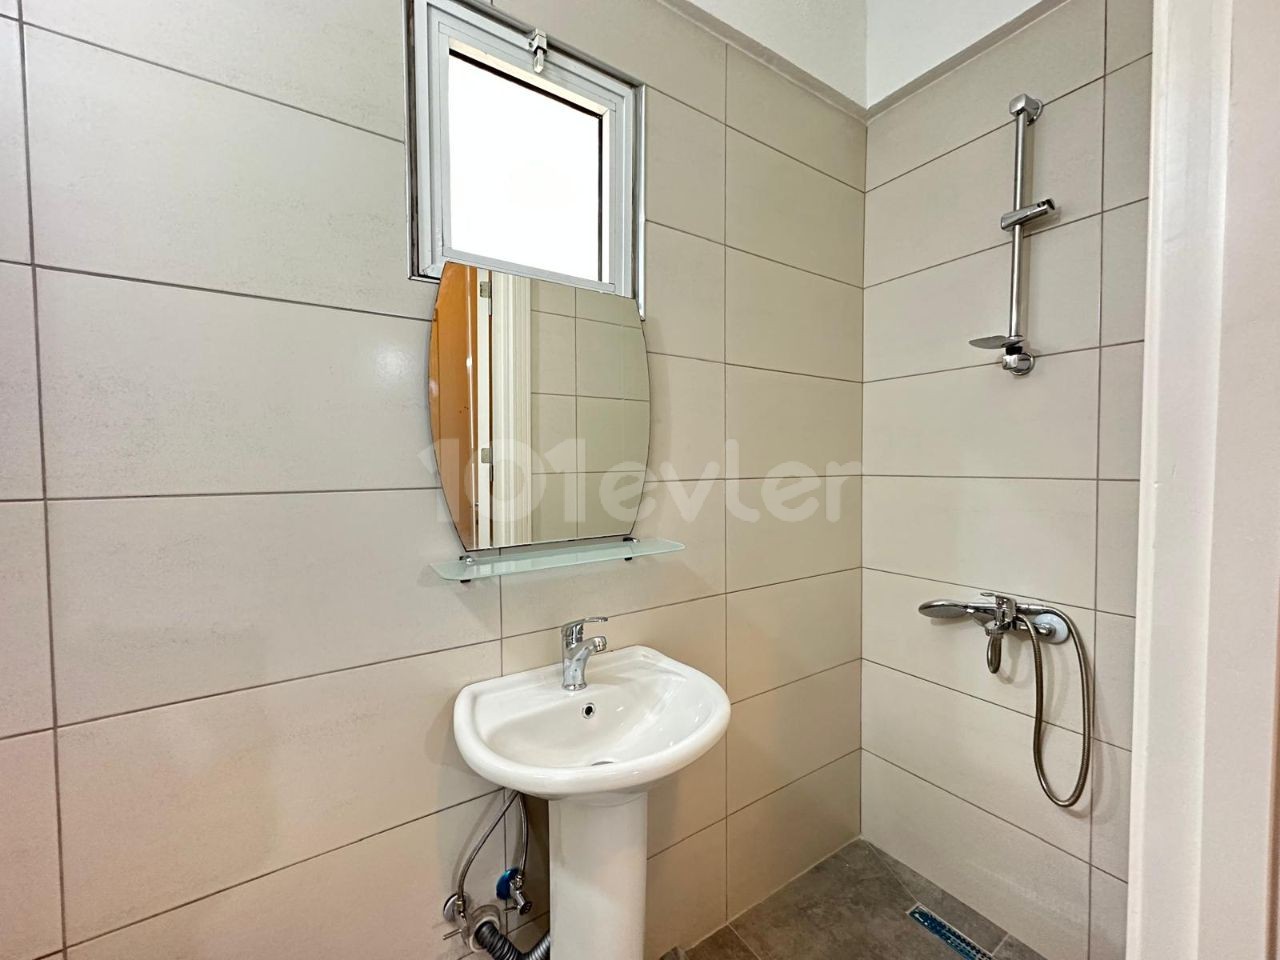 3+1 FLAT FOR RENT IN A SITE WITH POOL IN KYRENIA CENTER